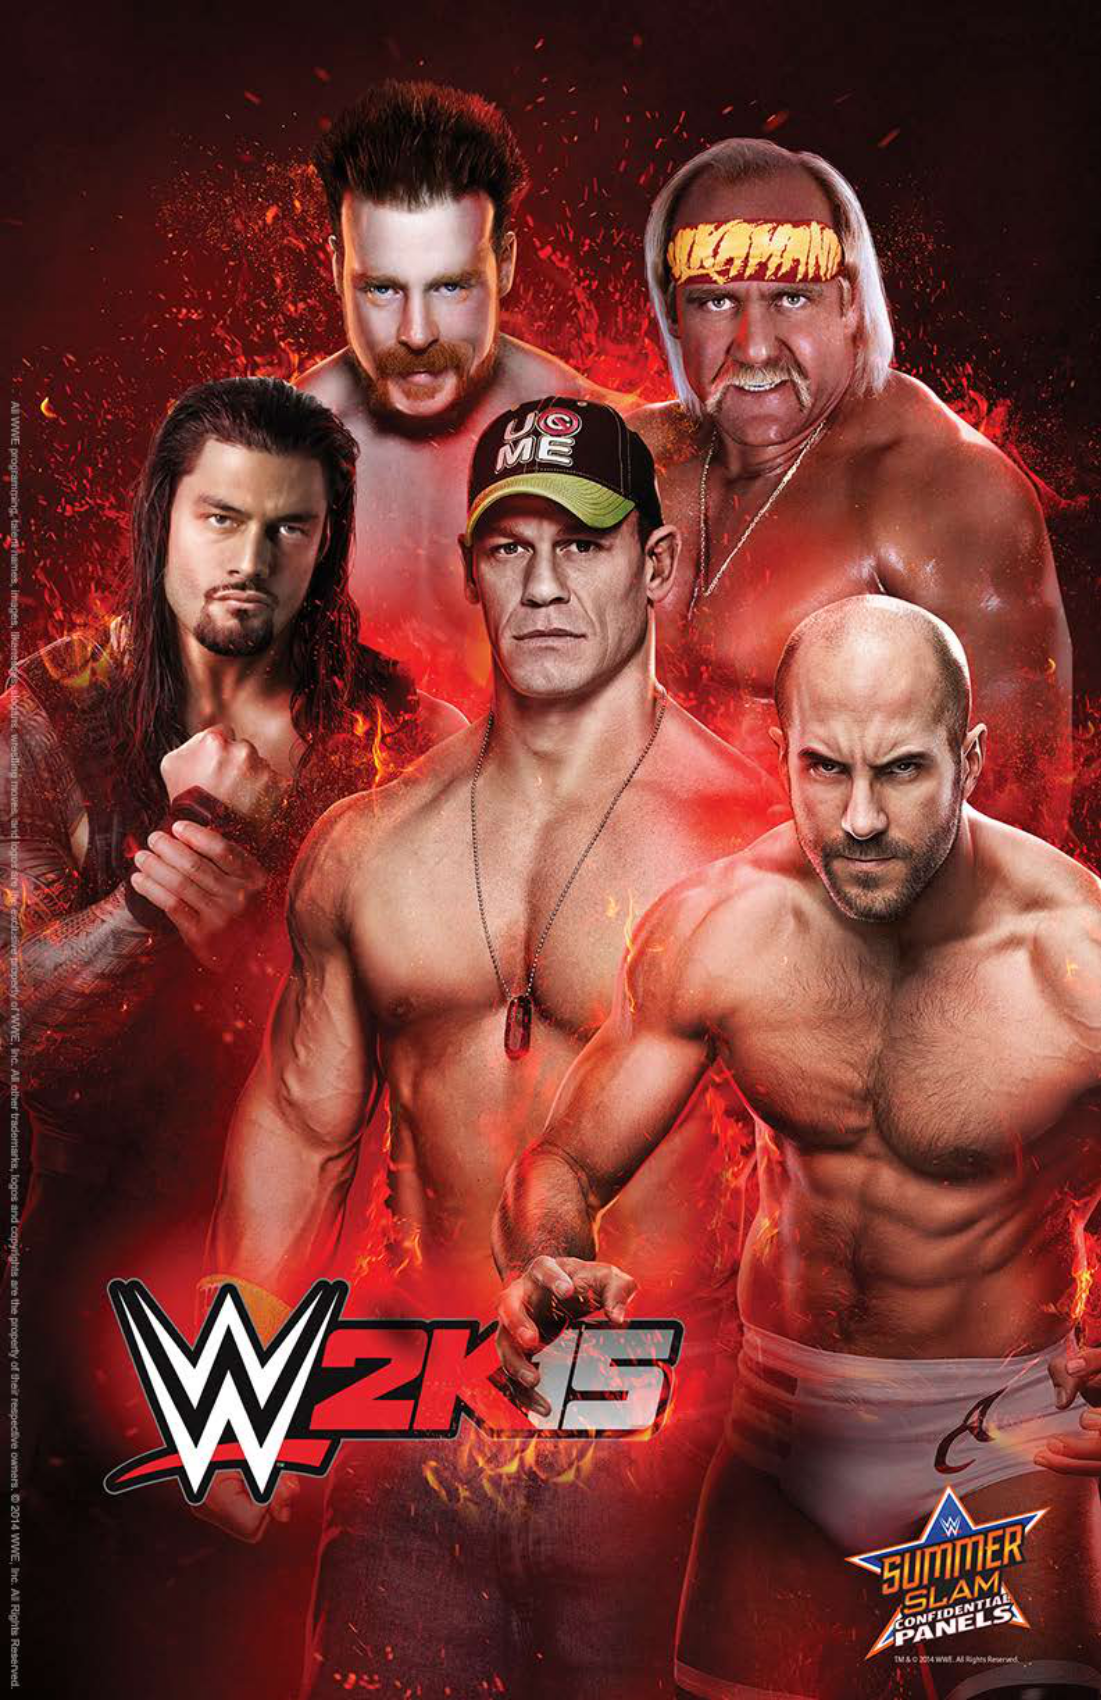 wwe_2k15_summer_slam_poster_by_thexrealx